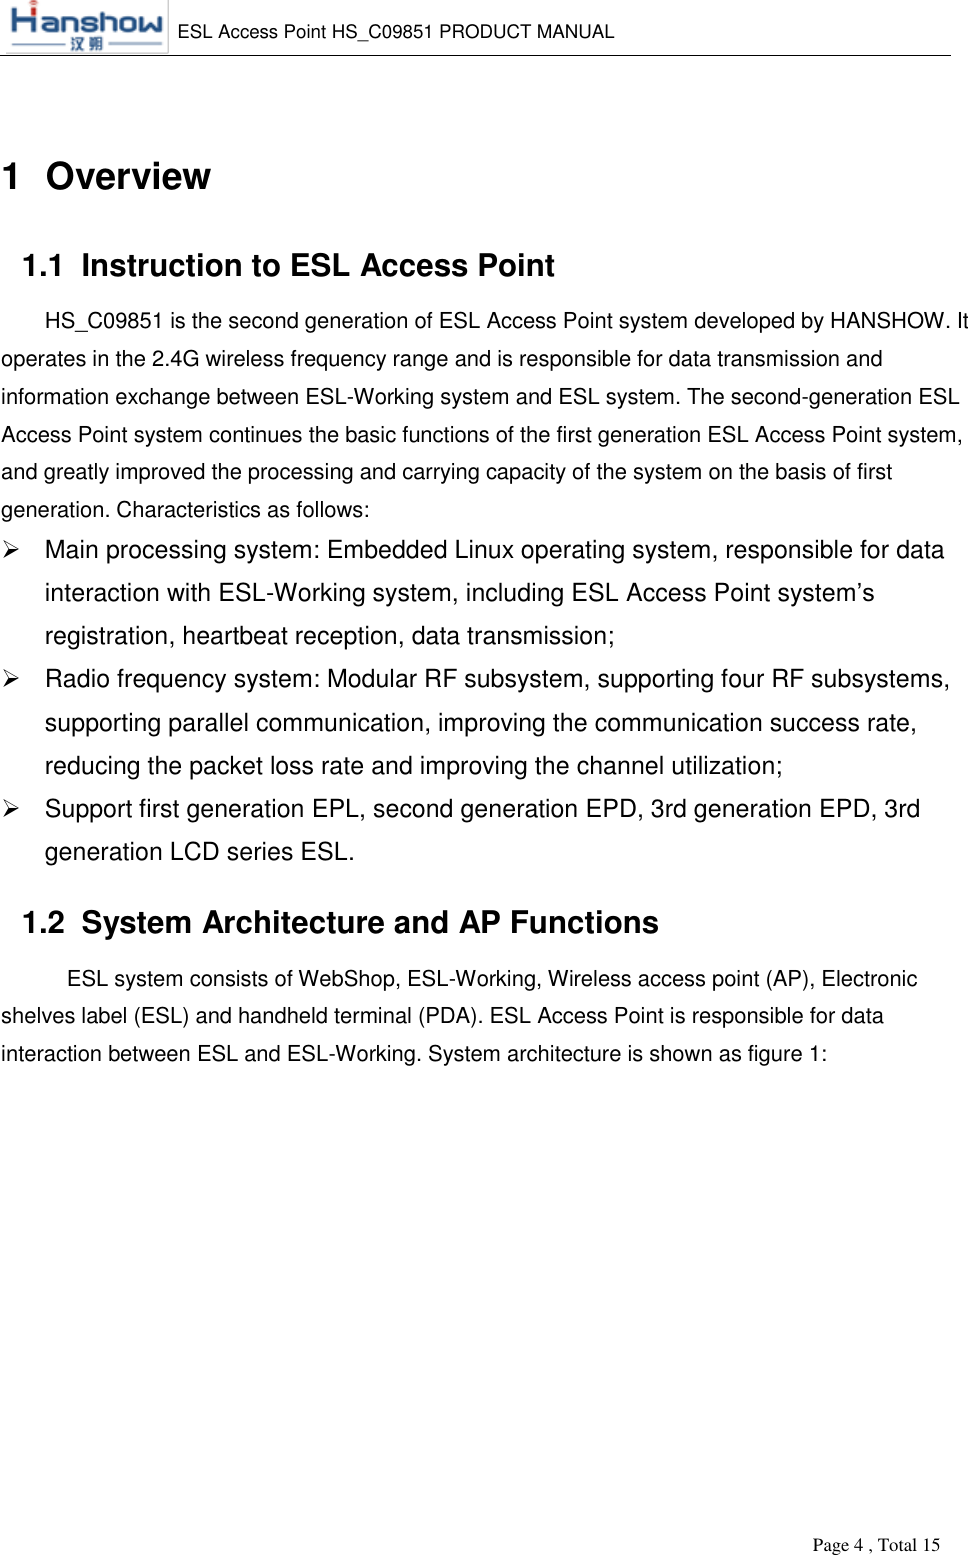    ESL Access Point HS_C09851 PRODUCT MANUAL          Page 4 , Total 15        1  Overview 1.1  Instruction to ESL Access Point HS_C09851 is the second generation of ESL Access Point system developed by HANSHOW. It operates in the 2.4G wireless frequency range and is responsible for data transmission and information exchange between ESL-Working system and ESL system. The second-generation ESL Access Point system continues the basic functions of the first generation ESL Access Point system, and greatly improved the processing and carrying capacity of the system on the basis of first generation. Characteristics as follows:   Main processing system: Embedded Linux operating system, responsible for data interaction with ESL-Working system, including ESL Access Point system’s registration, heartbeat reception, data transmission;   Radio frequency system: Modular RF subsystem, supporting four RF subsystems, supporting parallel communication, improving the communication success rate, reducing the packet loss rate and improving the channel utilization;   Support first generation EPL, second generation EPD, 3rd generation EPD, 3rd generation LCD series ESL. 1.2  System Architecture and AP Functions  ESL system consists of WebShop, ESL-Working, Wireless access point (AP), Electronic shelves label (ESL) and handheld terminal (PDA). ESL Access Point is responsible for data interaction between ESL and ESL-Working. System architecture is shown as figure 1: 